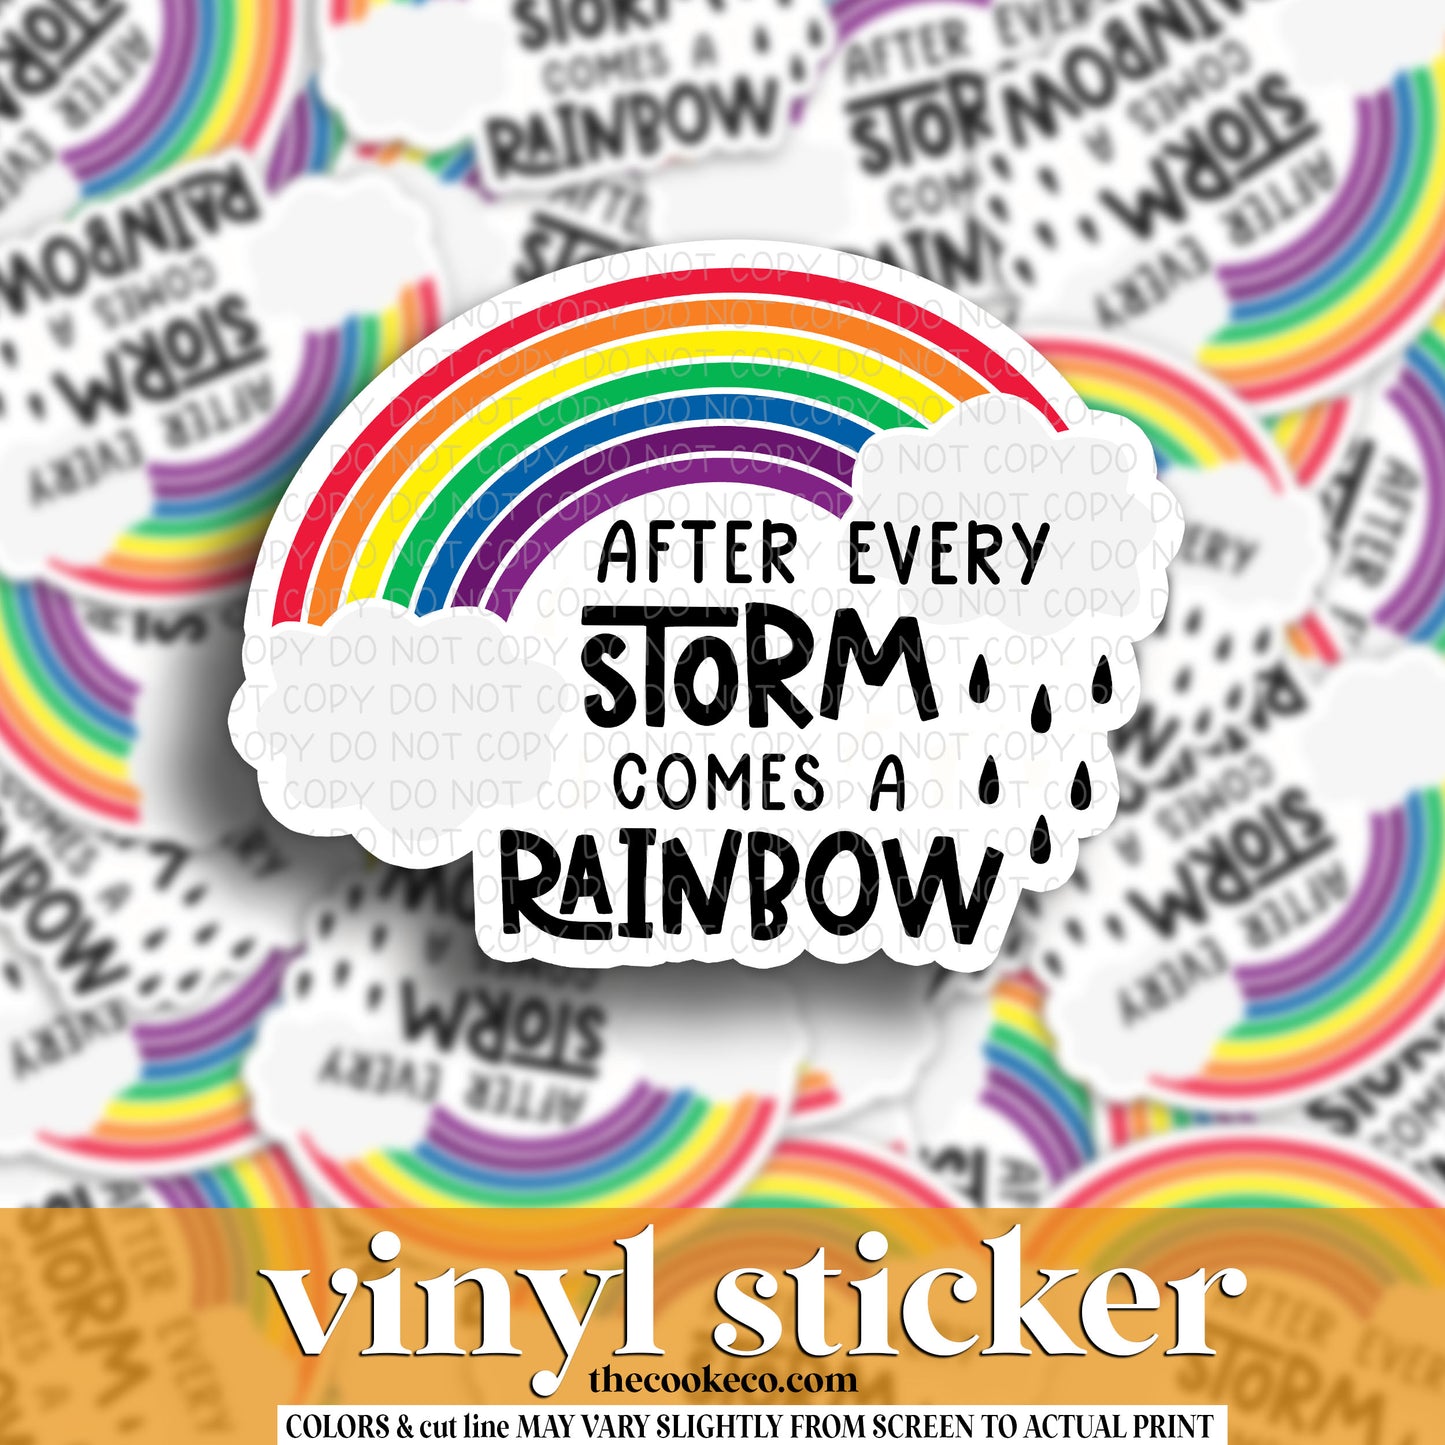 Vinyl Sticker | #V1480 - AFTER EVERY STORM COMES A RAINBOW